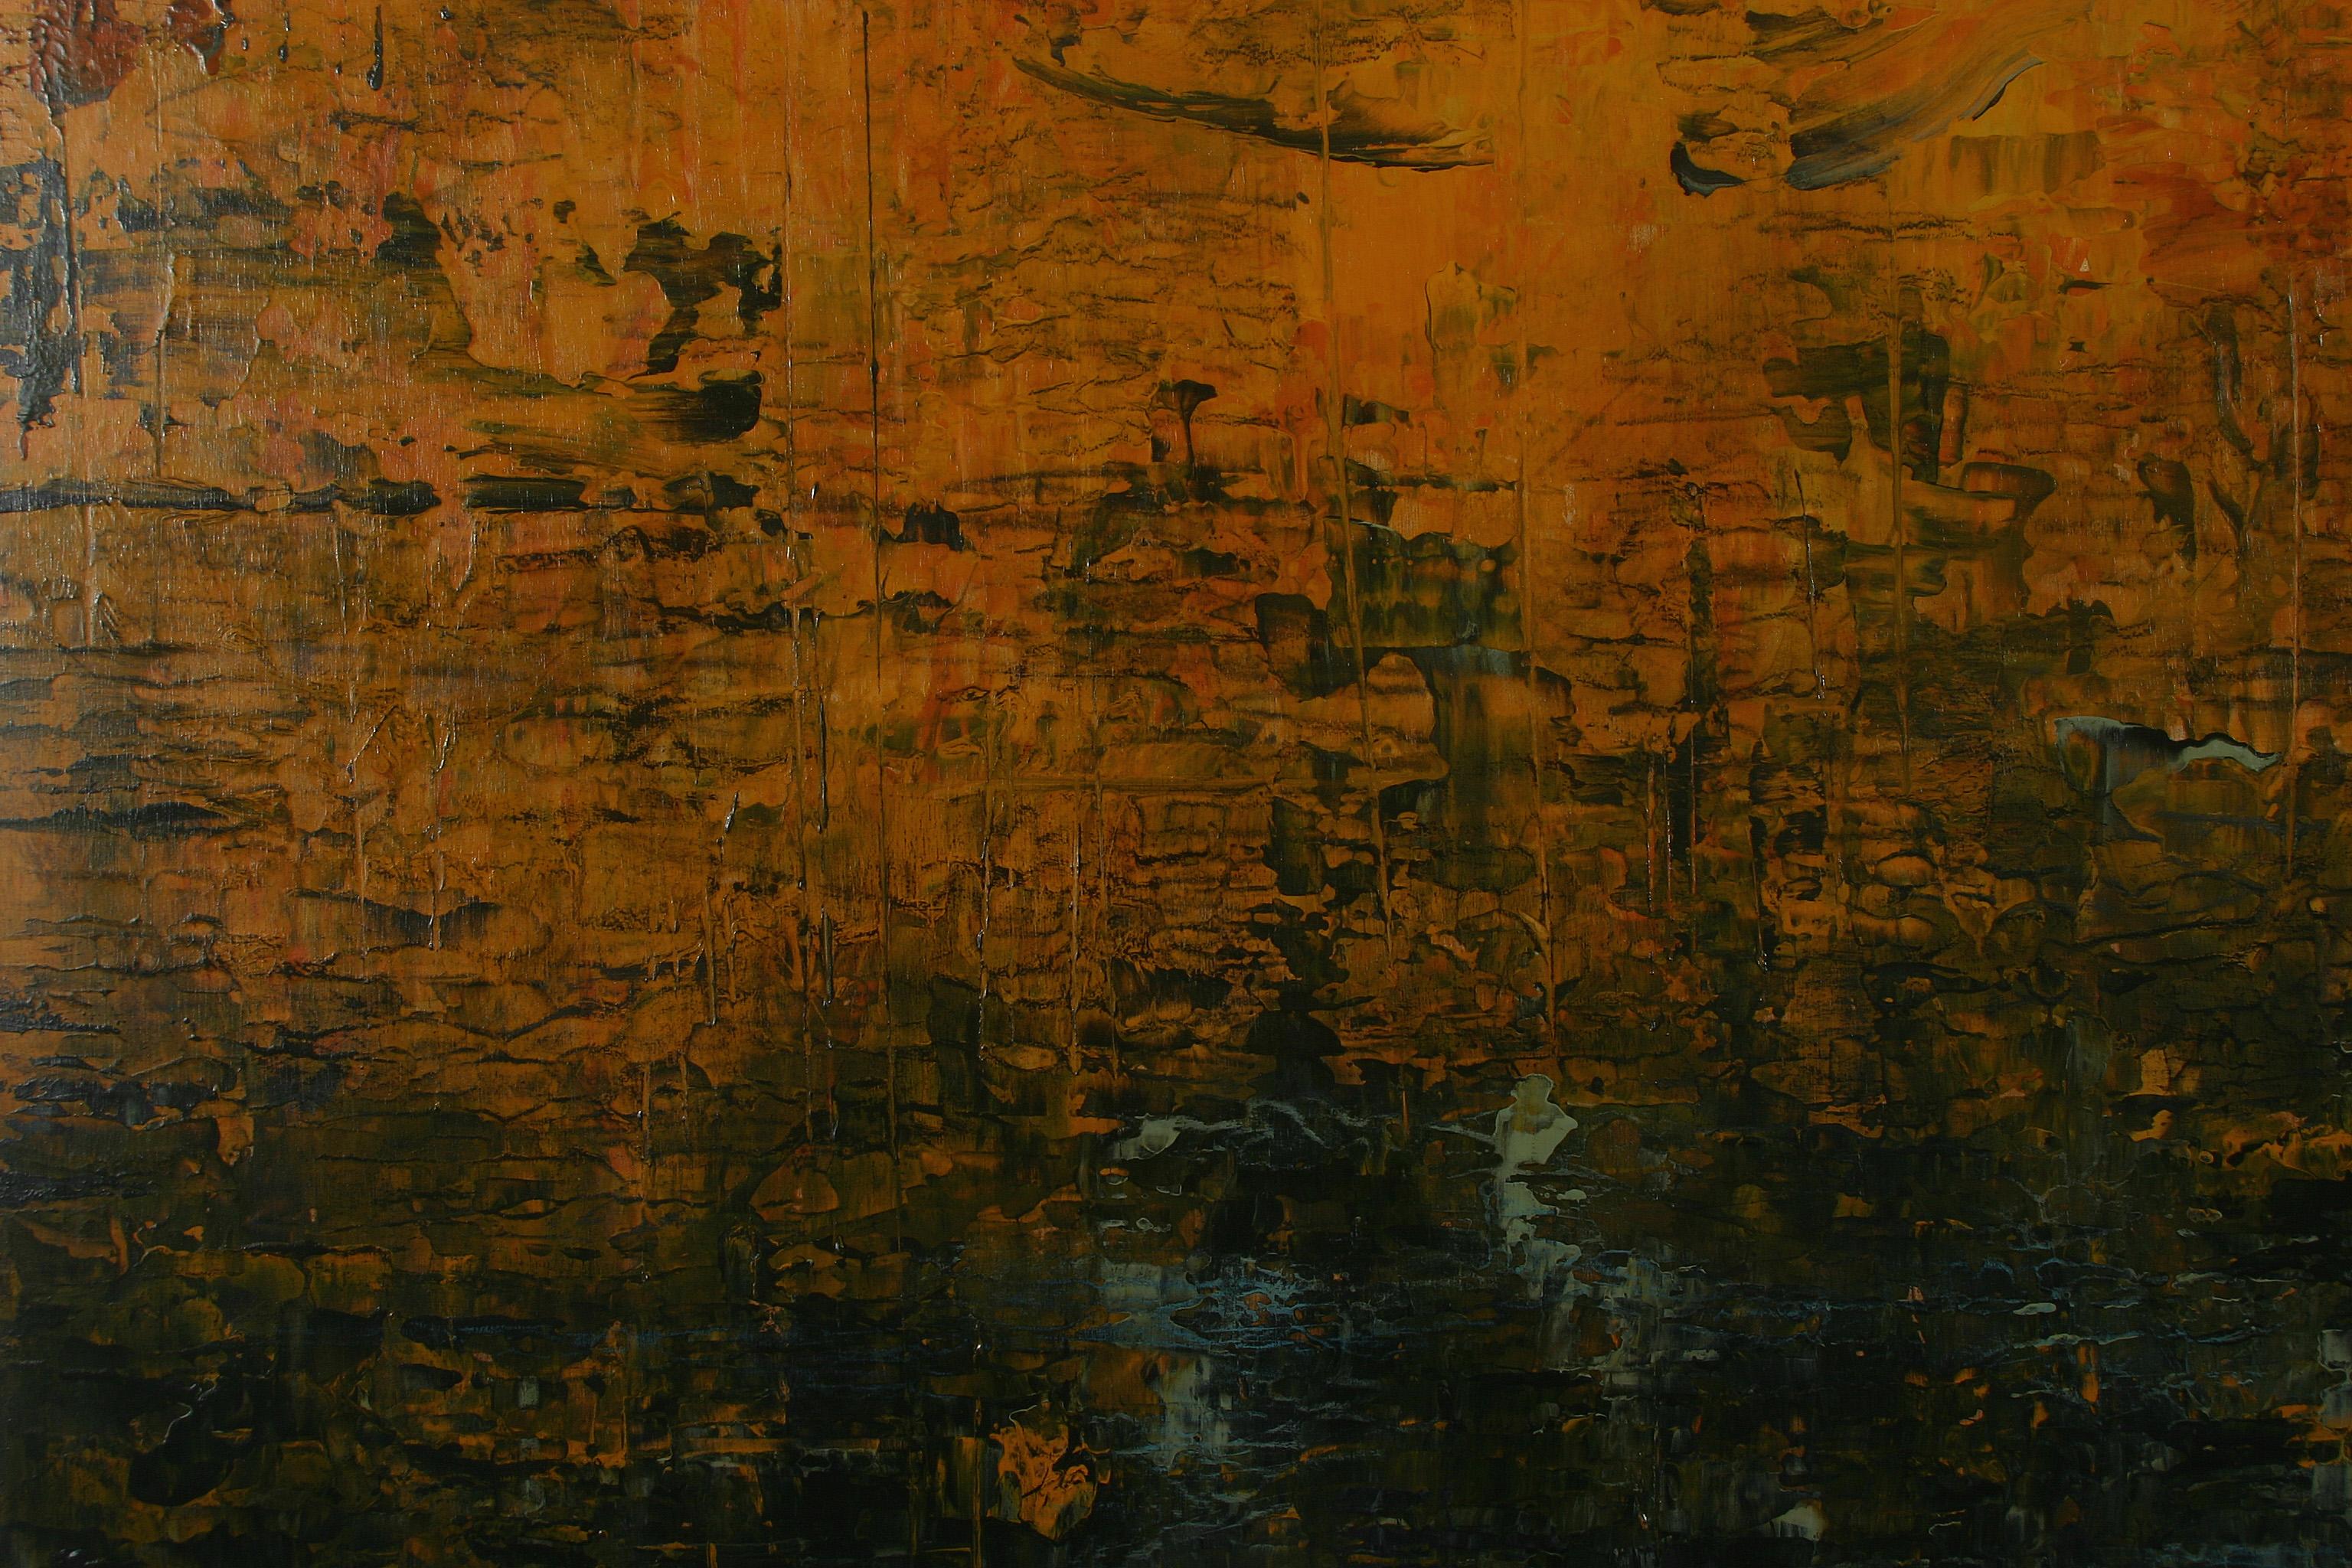 <p>Artist Comments<br>Artist Patricia Oblack renders her compositions instinctively with the use of a palette knife. With dark and dusky hues of black, navy, and ochre, Patricia portrays a warm atmospheric image layered with marks and patterns. By